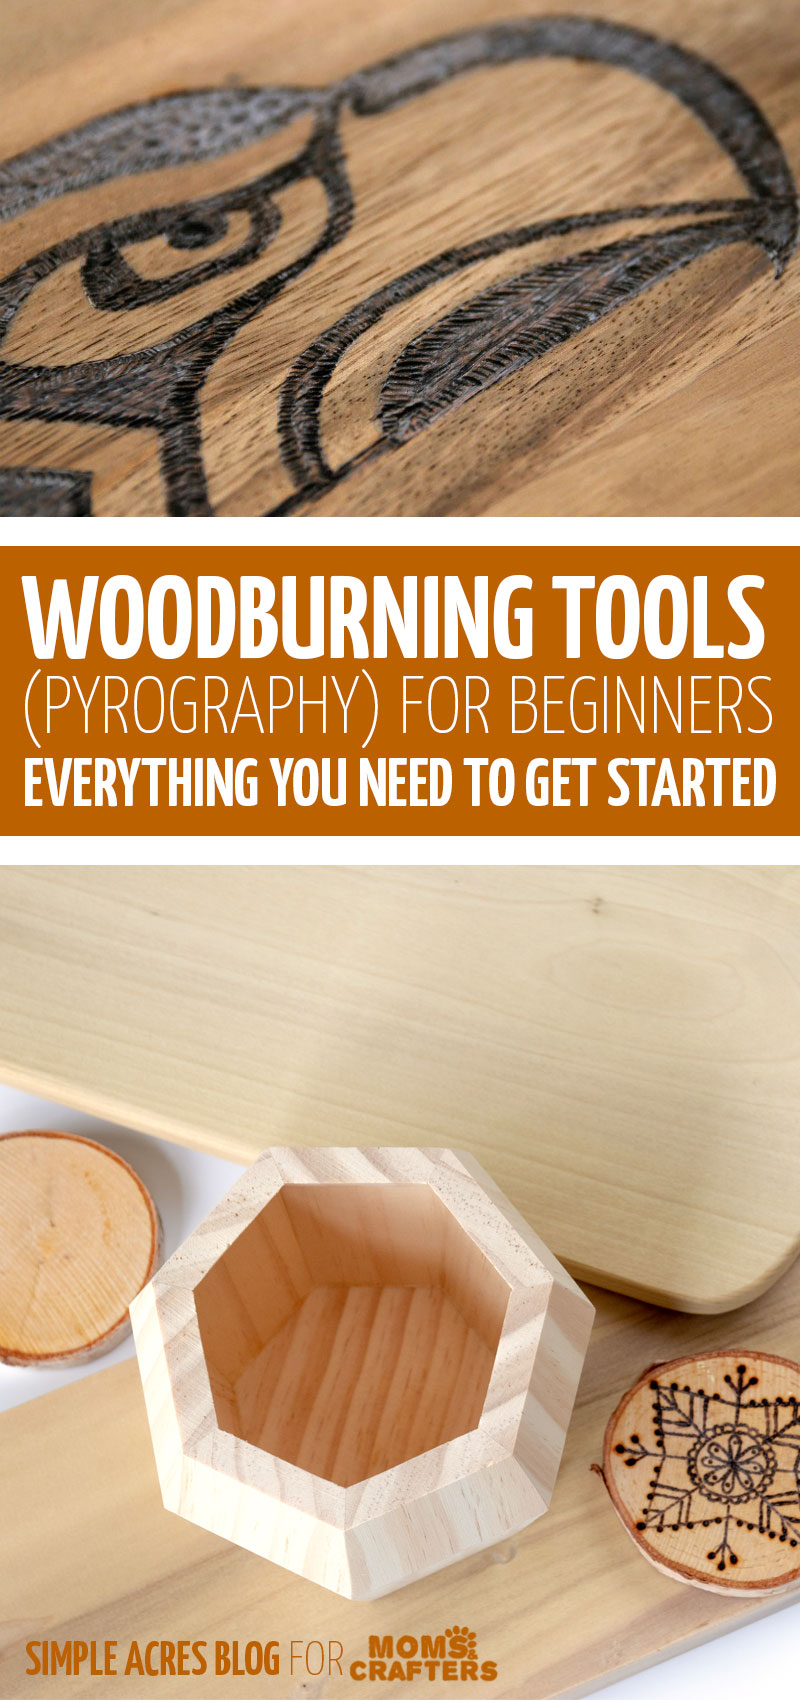 Pyrography Tools for Beginners * Moms and Crafters